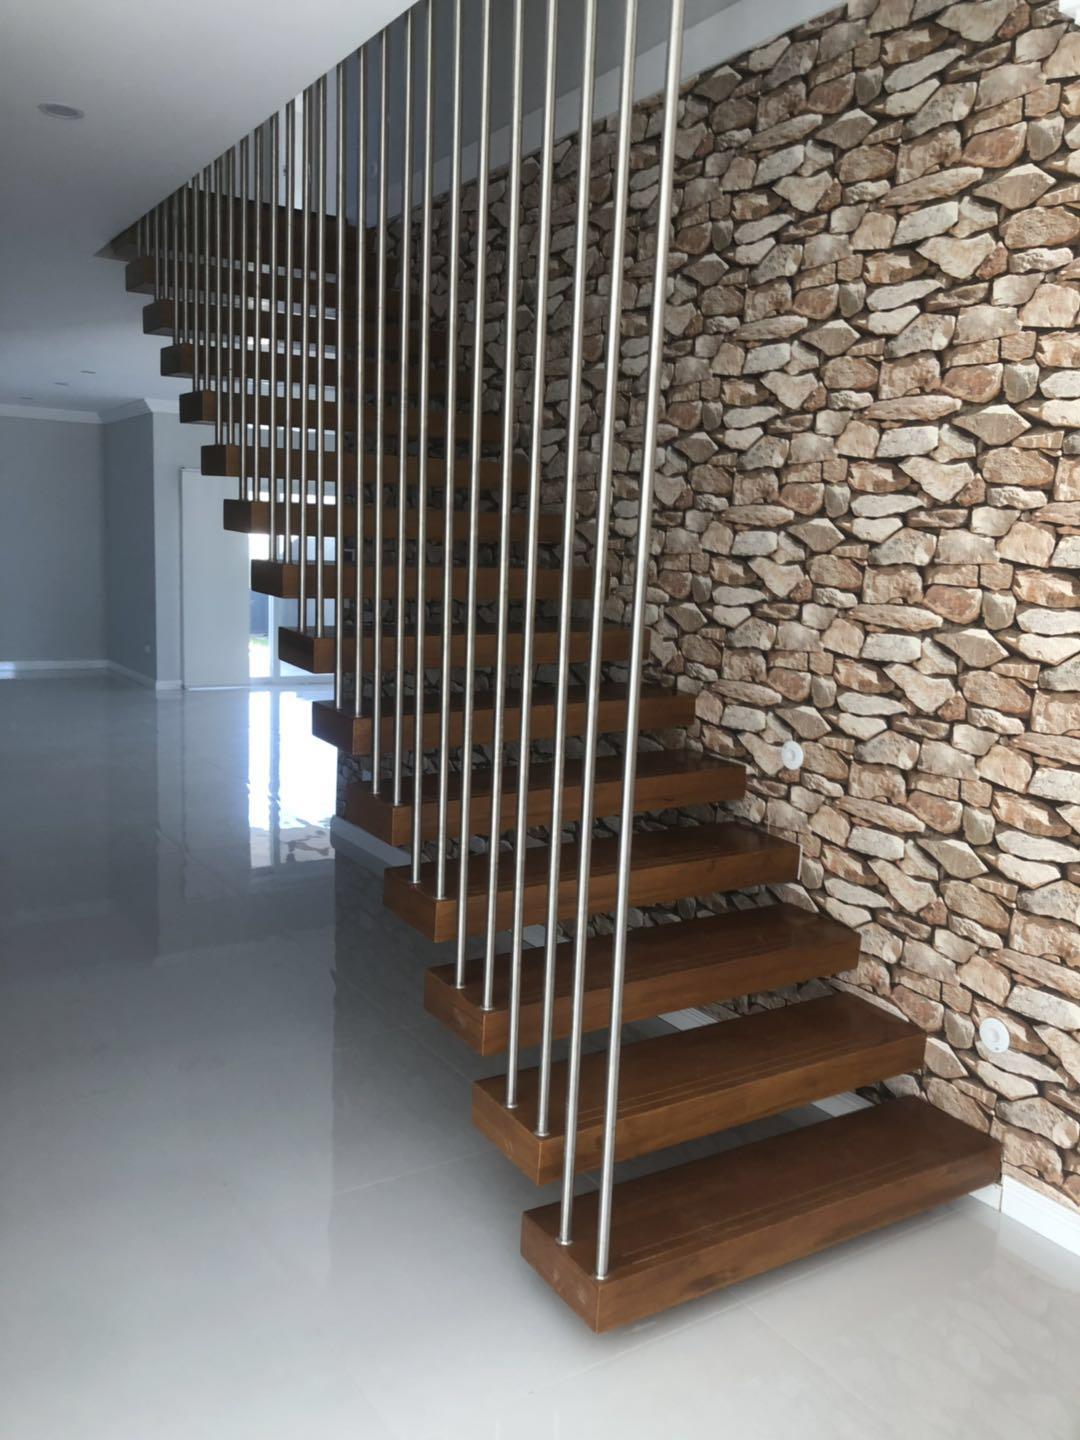 YUDI Stairs metal floating stairs supply for hotel